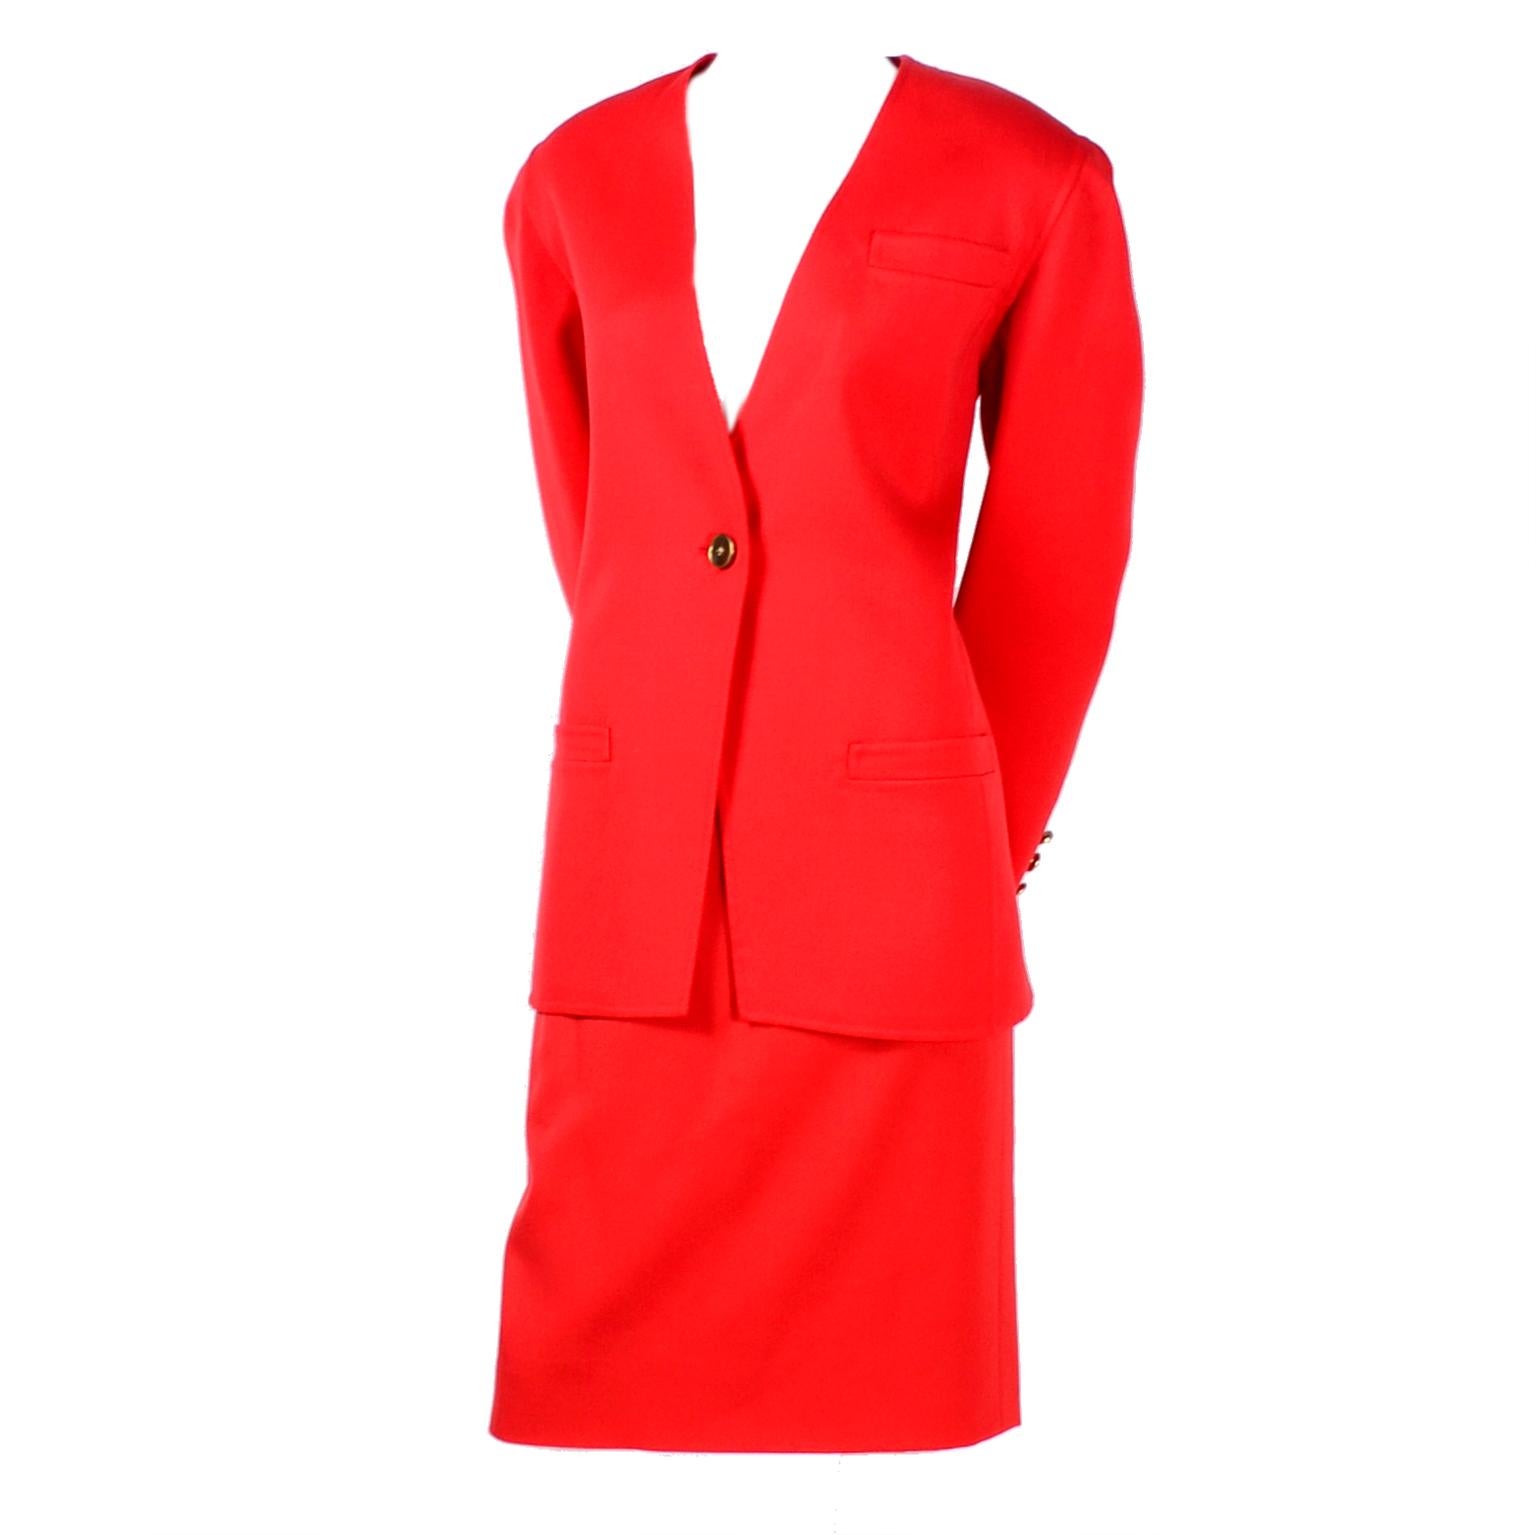 This is a gorgeous Bill Blass 3 piece outfit with a blazer jacket and option of skirt or high waisted pants all in bright red/orange wool. The jacket has one front button for closure, and three buttons on each cuff. It has three pockets, and